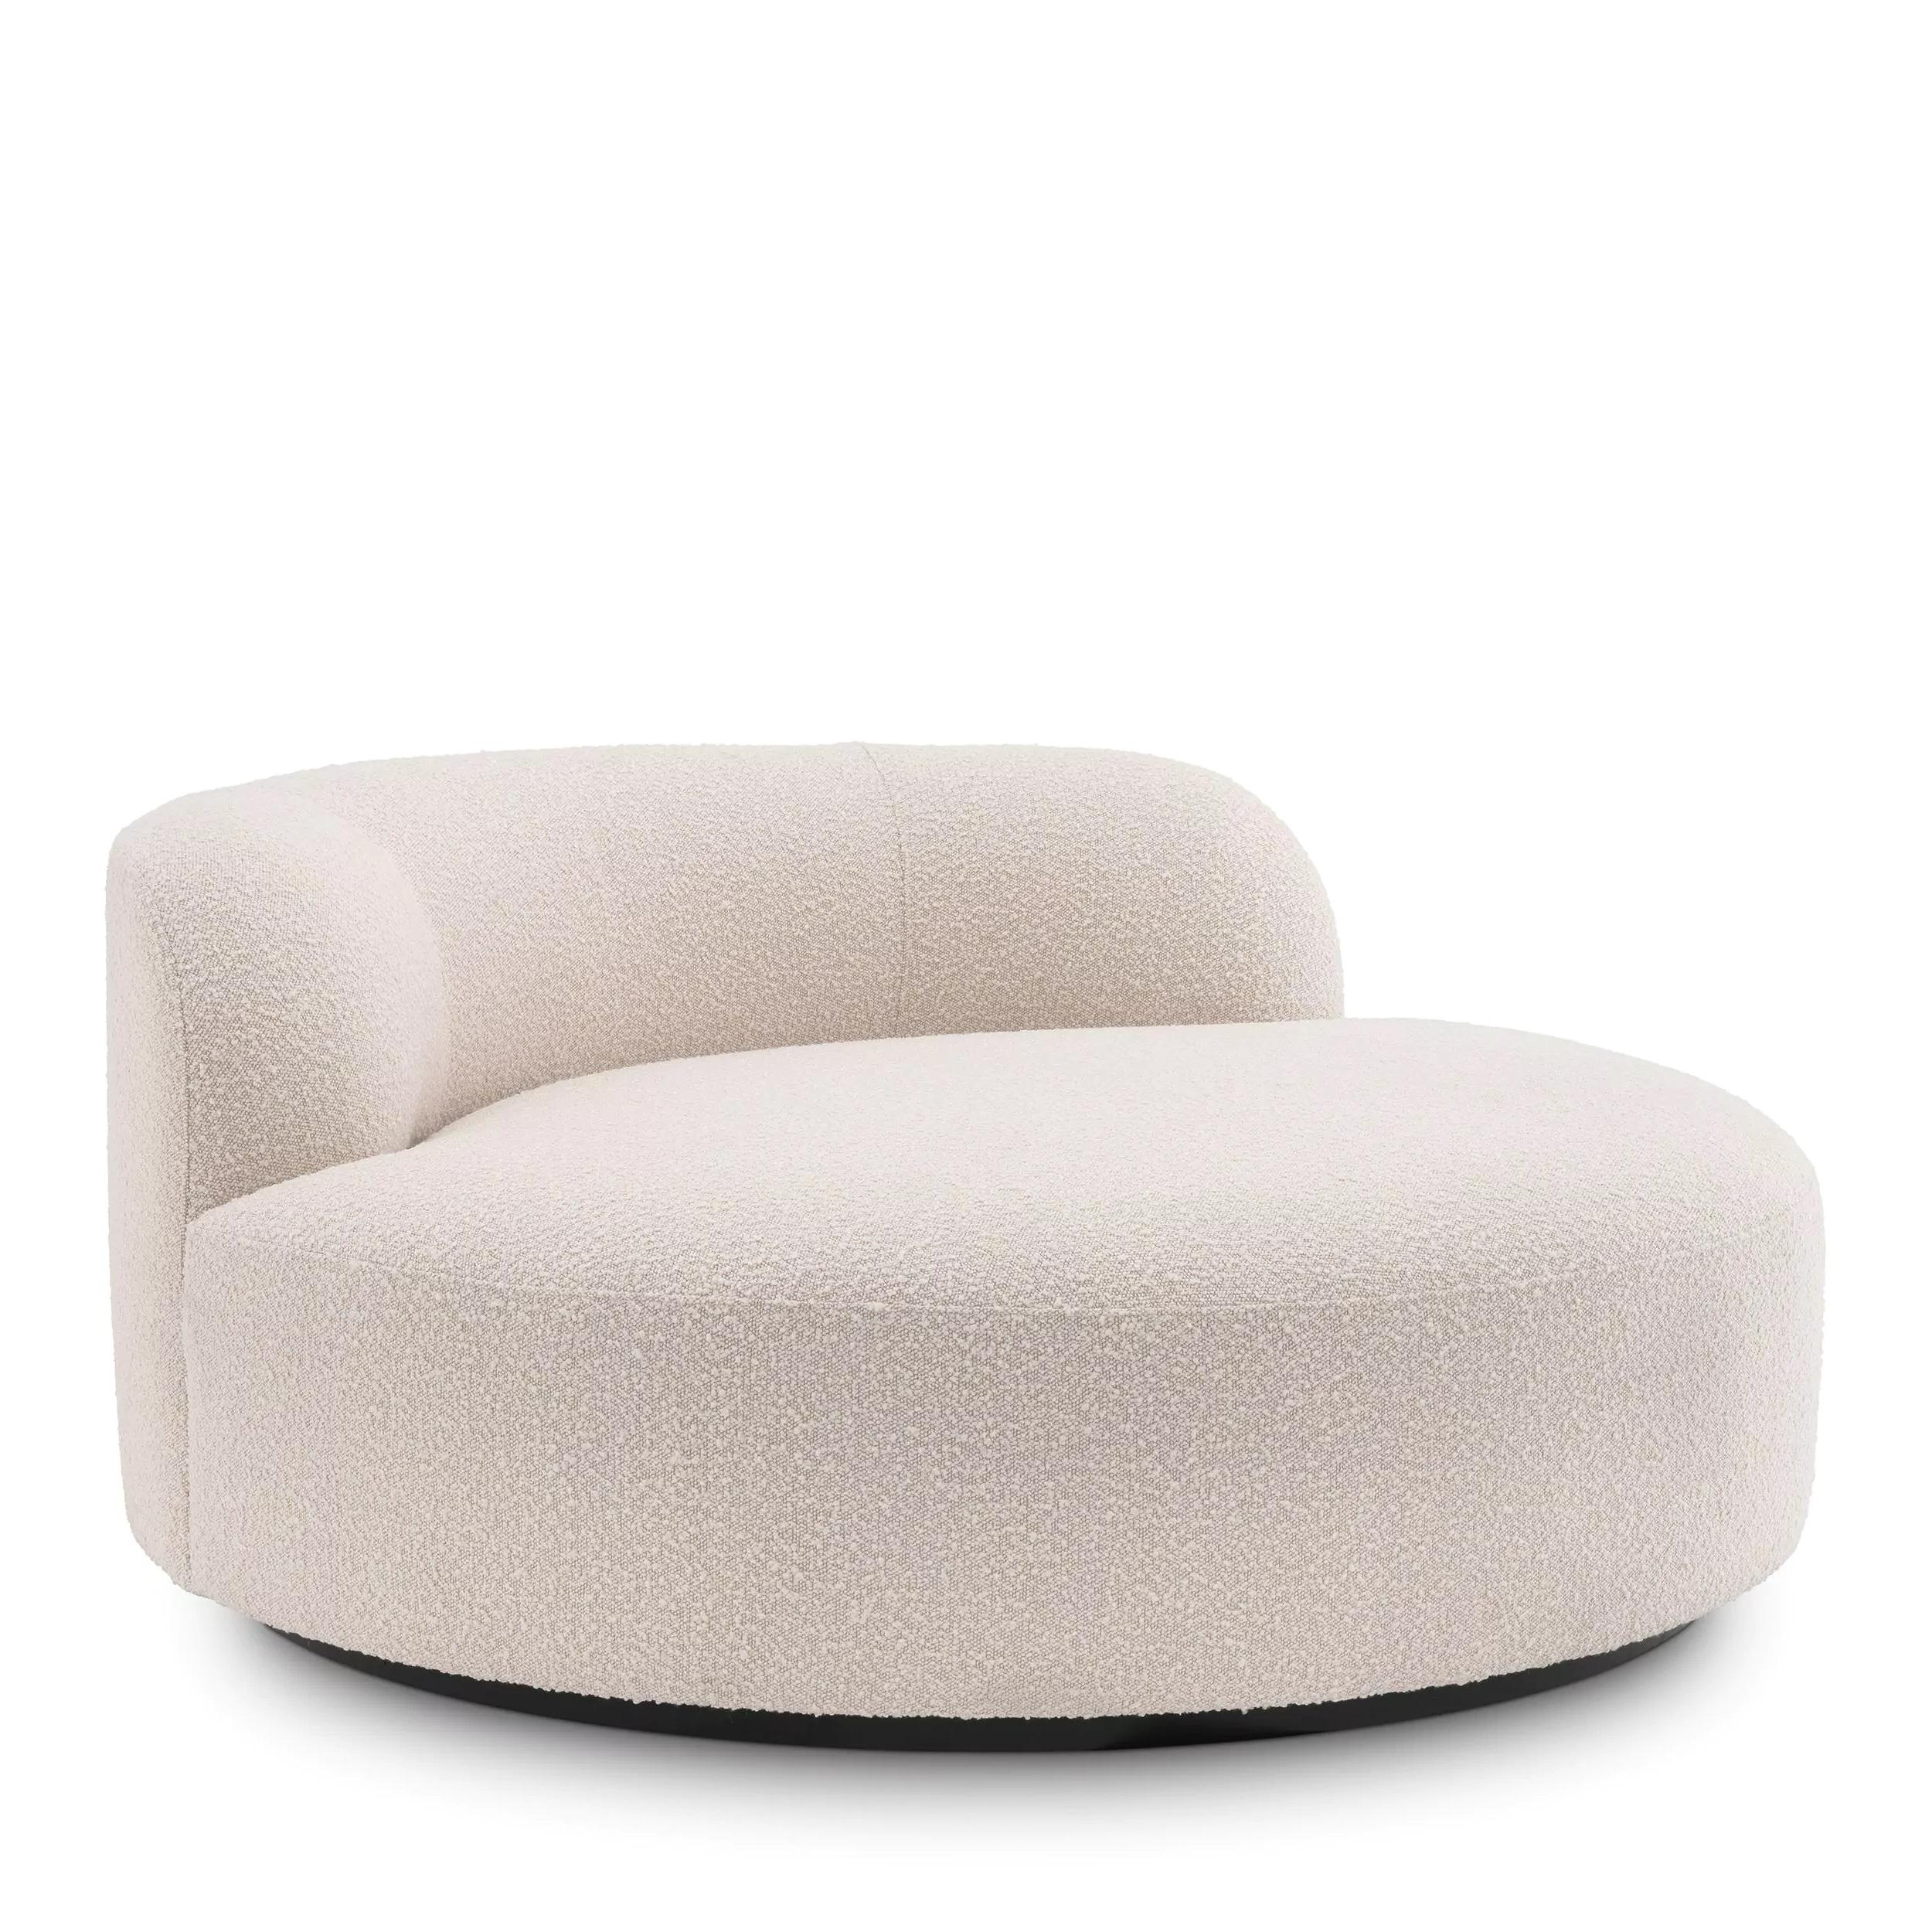 large round chair